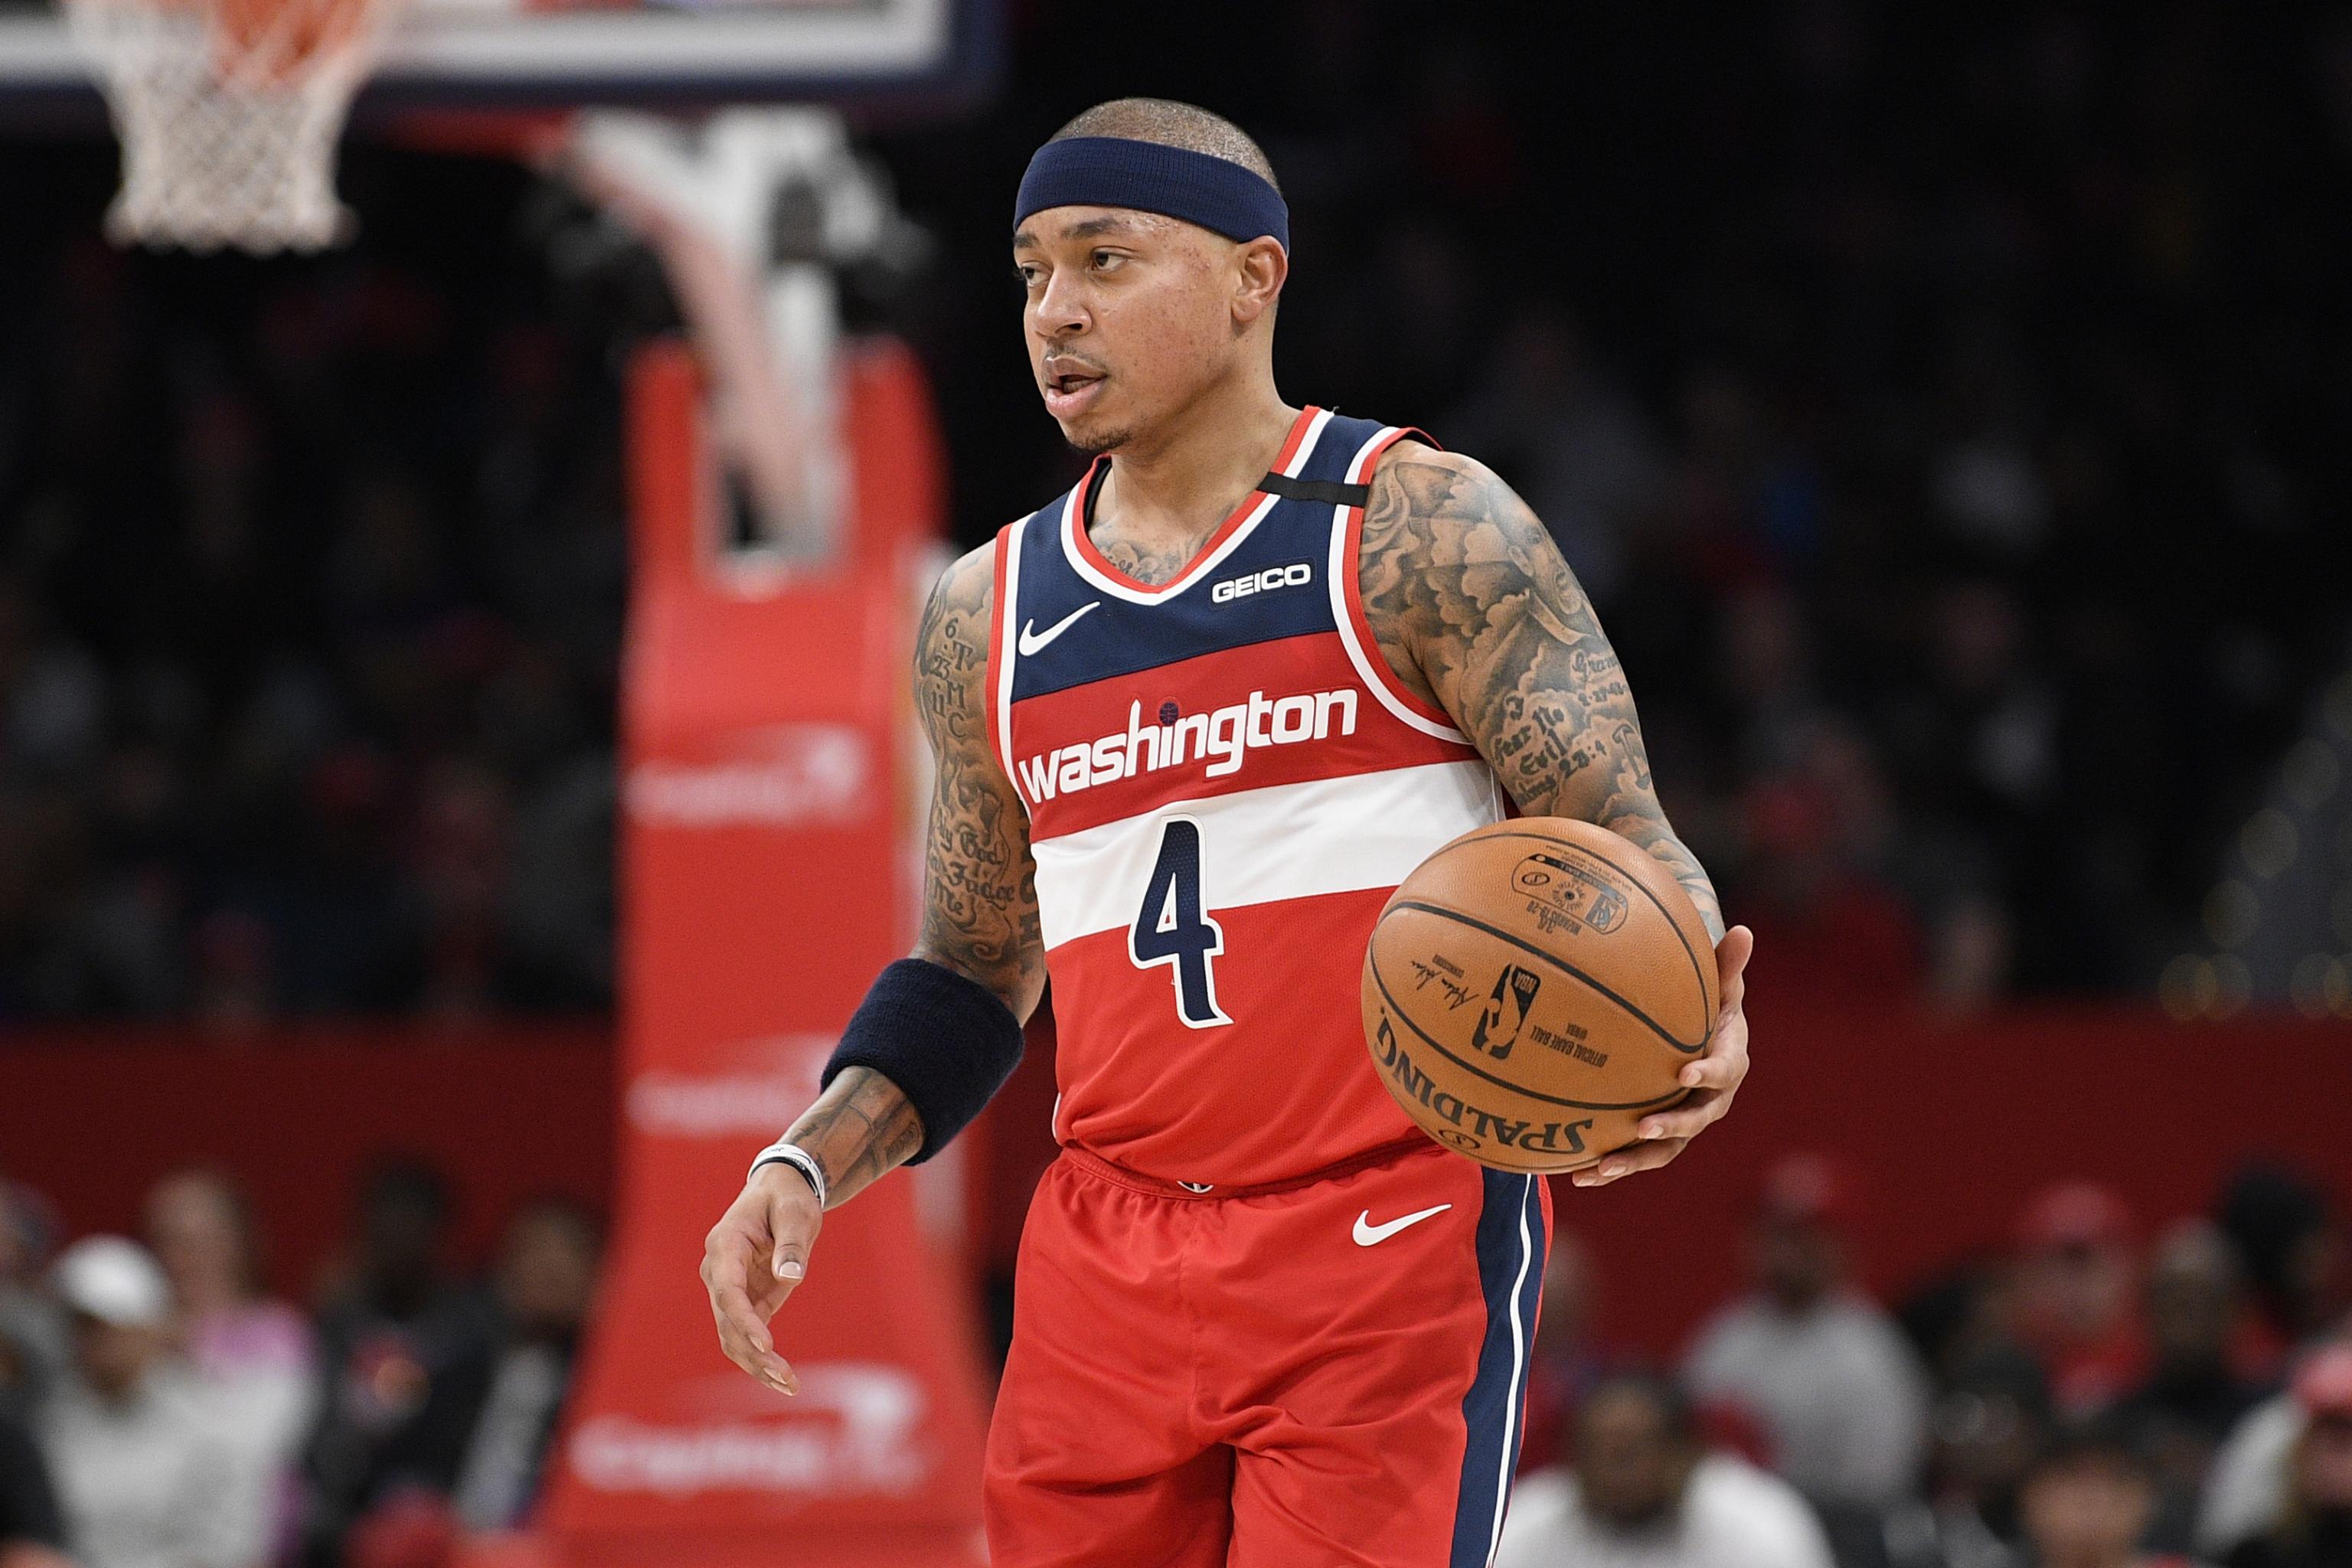 Shawn on X: Isaiah Thomas  𝕭𝖔𝖘𝖙𝖔𝖓 𝕮𝖊𝖑𝖙𝖎𝖈𝖘 ➟ 24.7 ppg for  Boston in 179 games ➟ 2x All Star (in Boston